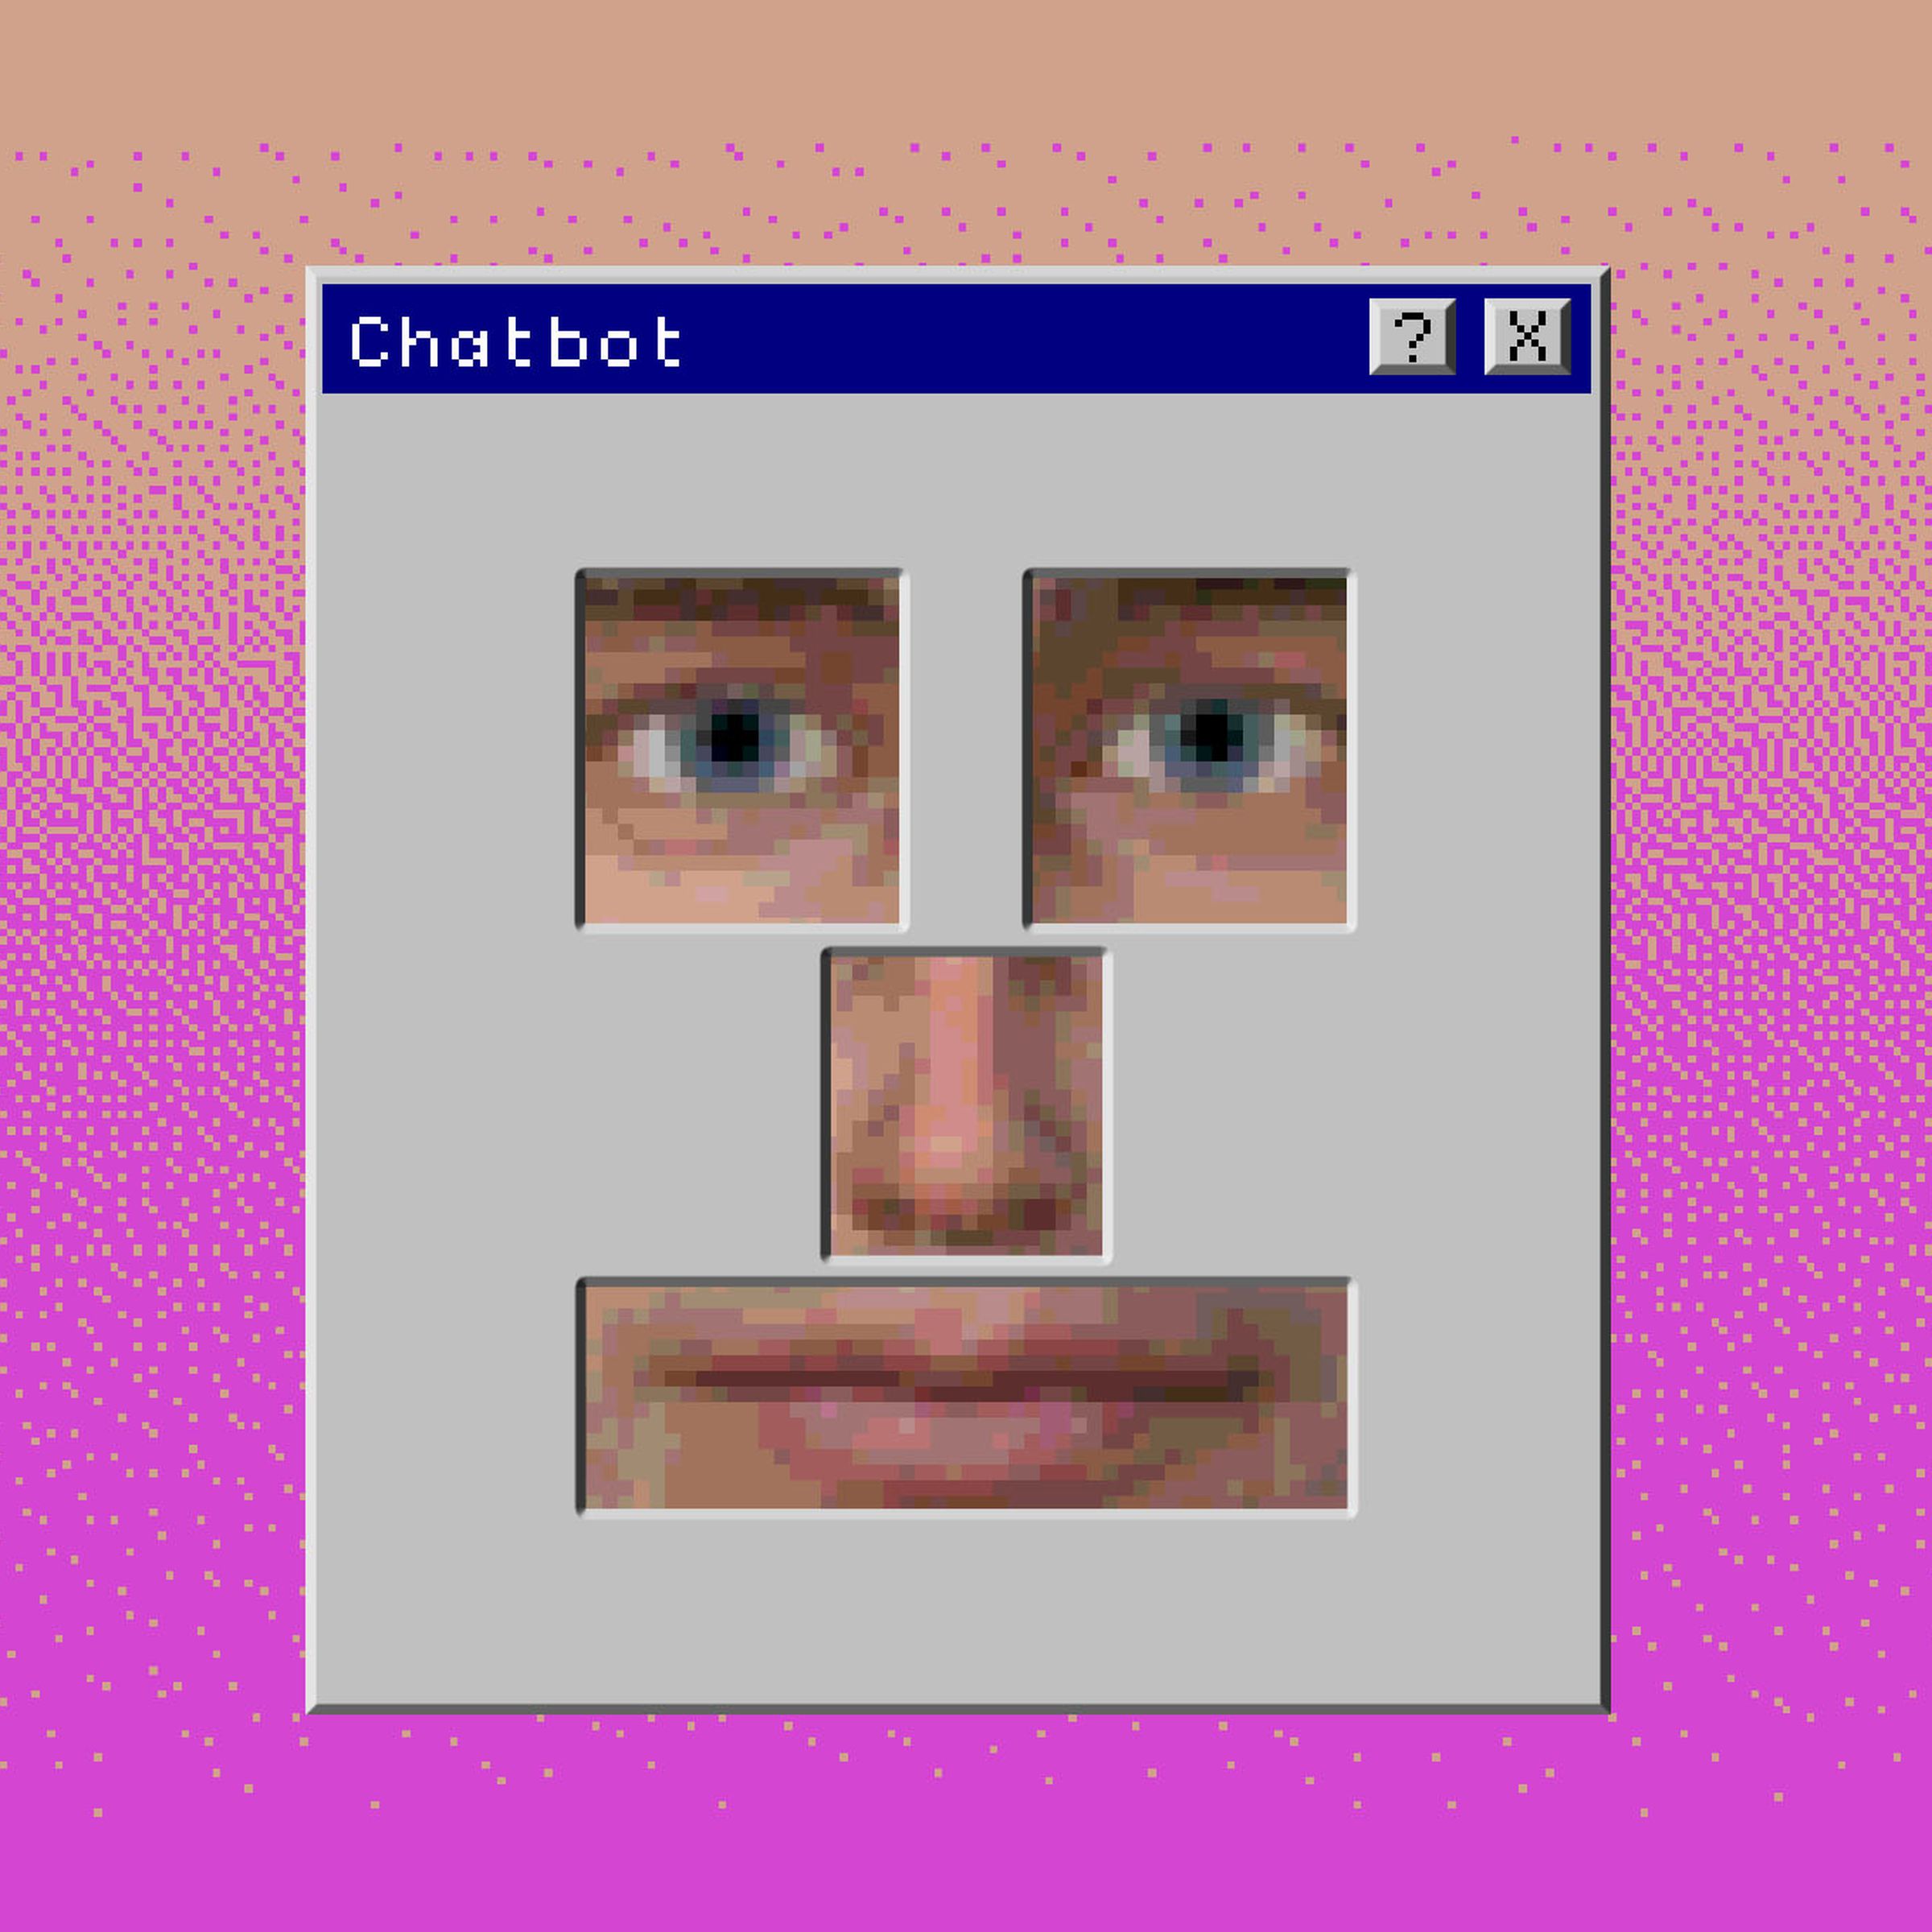 Illustration of a chatbot with a creepy human face.